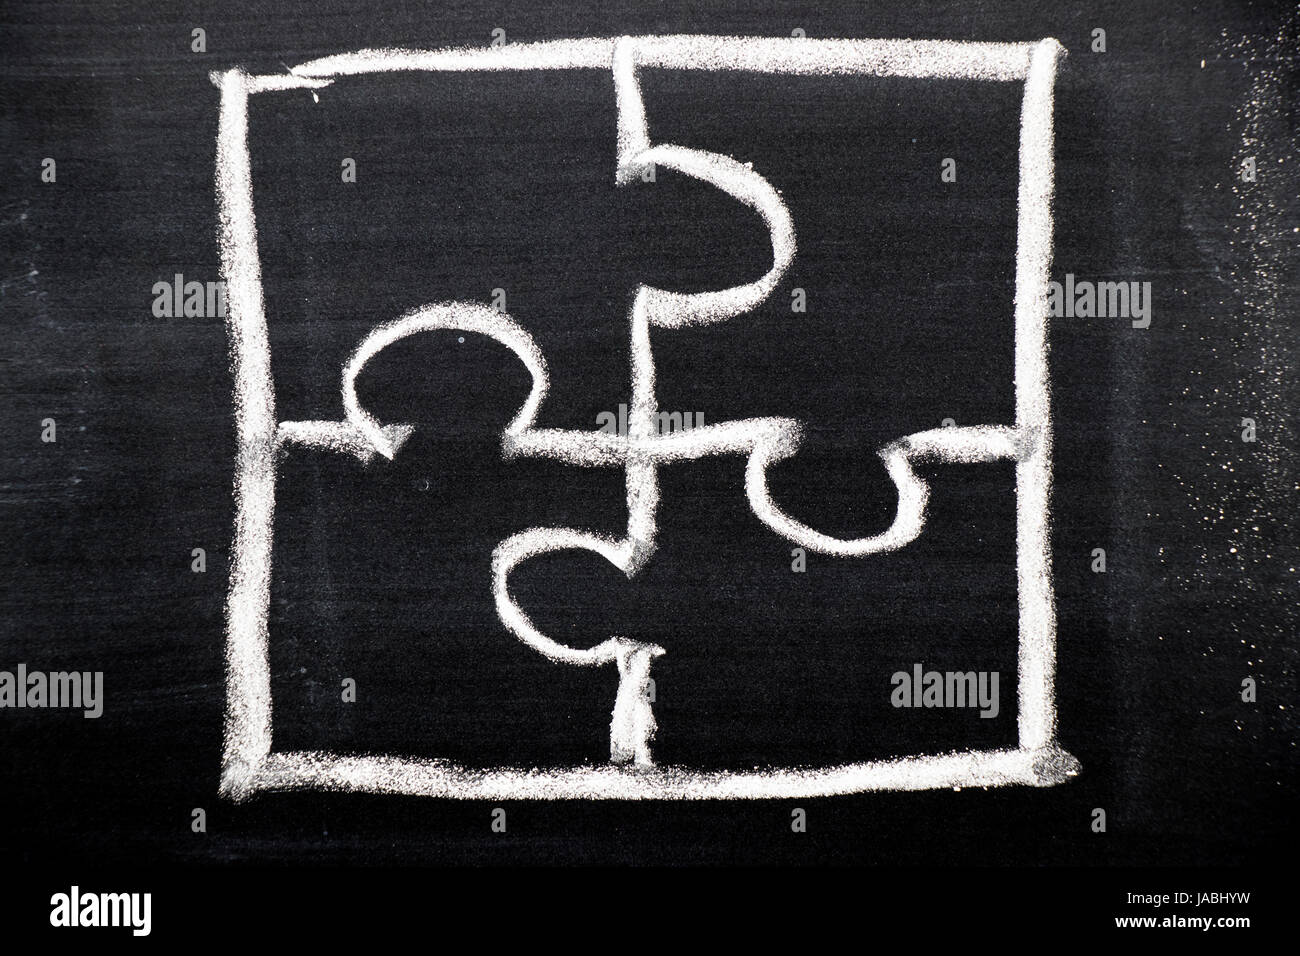 Chalk hand drawing as puzzle shape on black board background Stock Photo